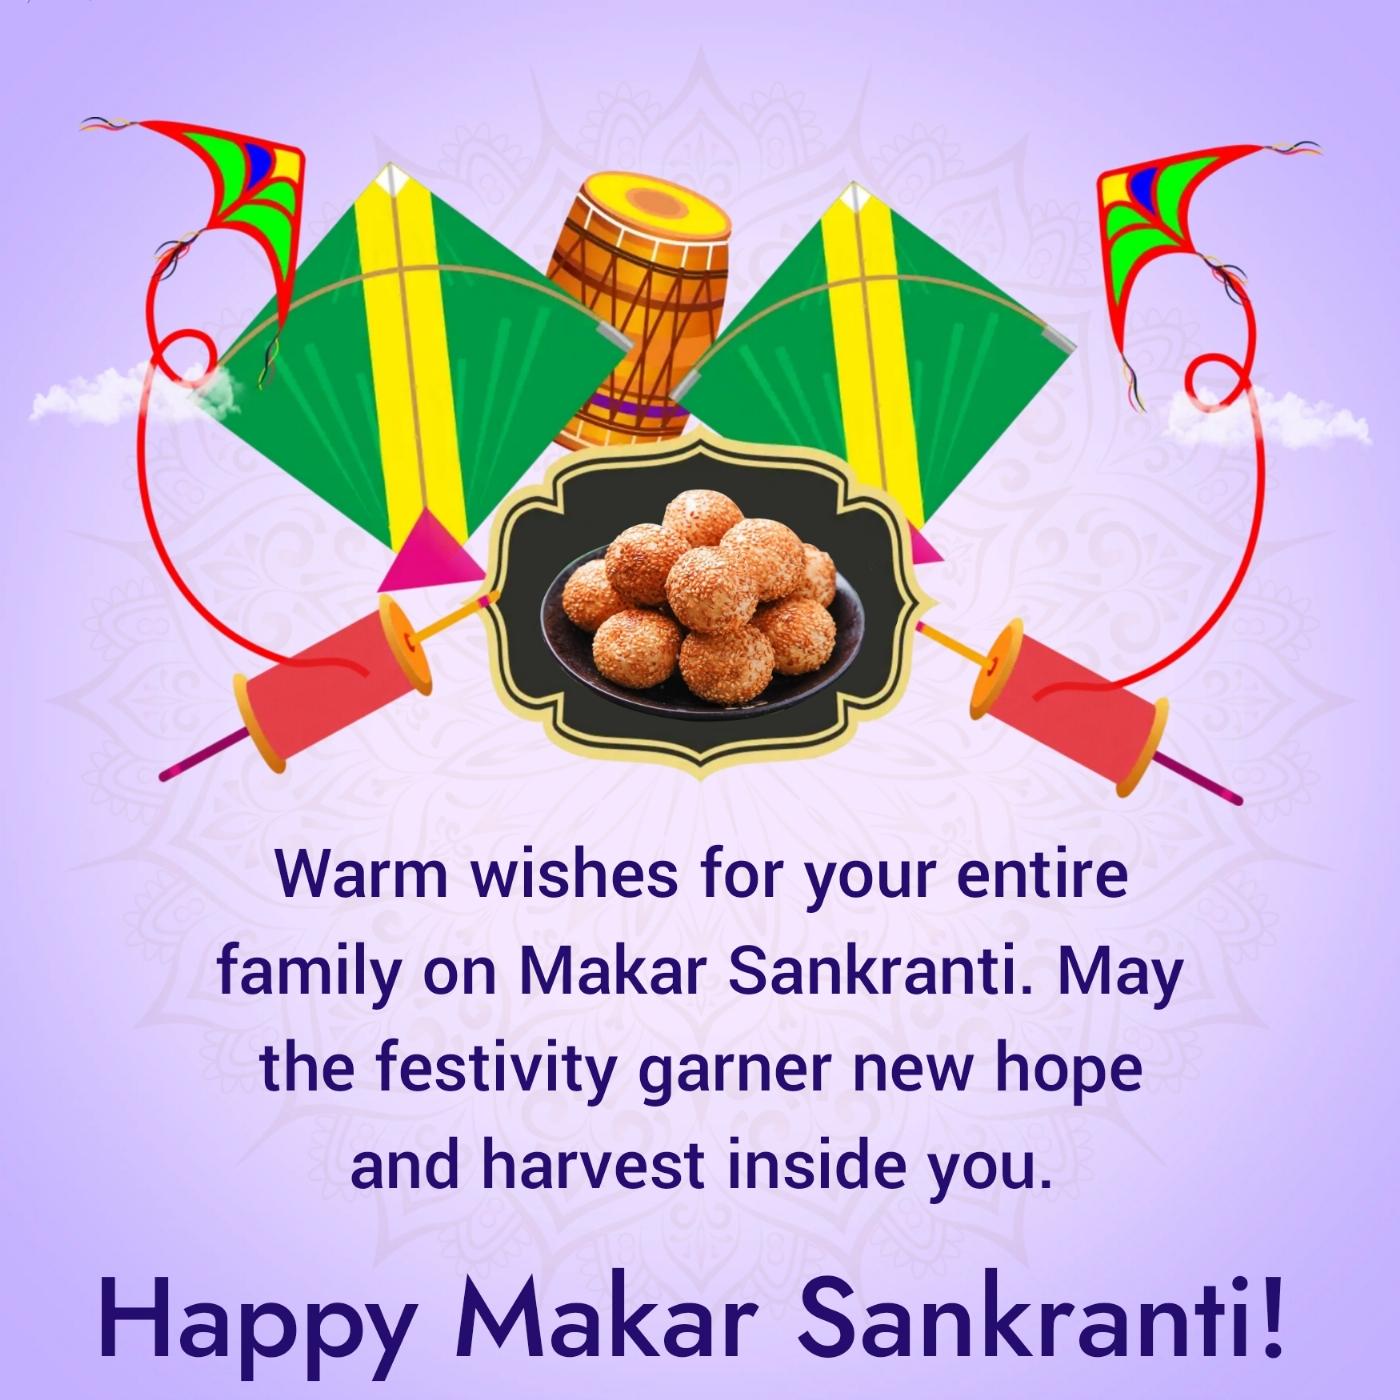 Warm wishes for your entire family on Makar Sankranti